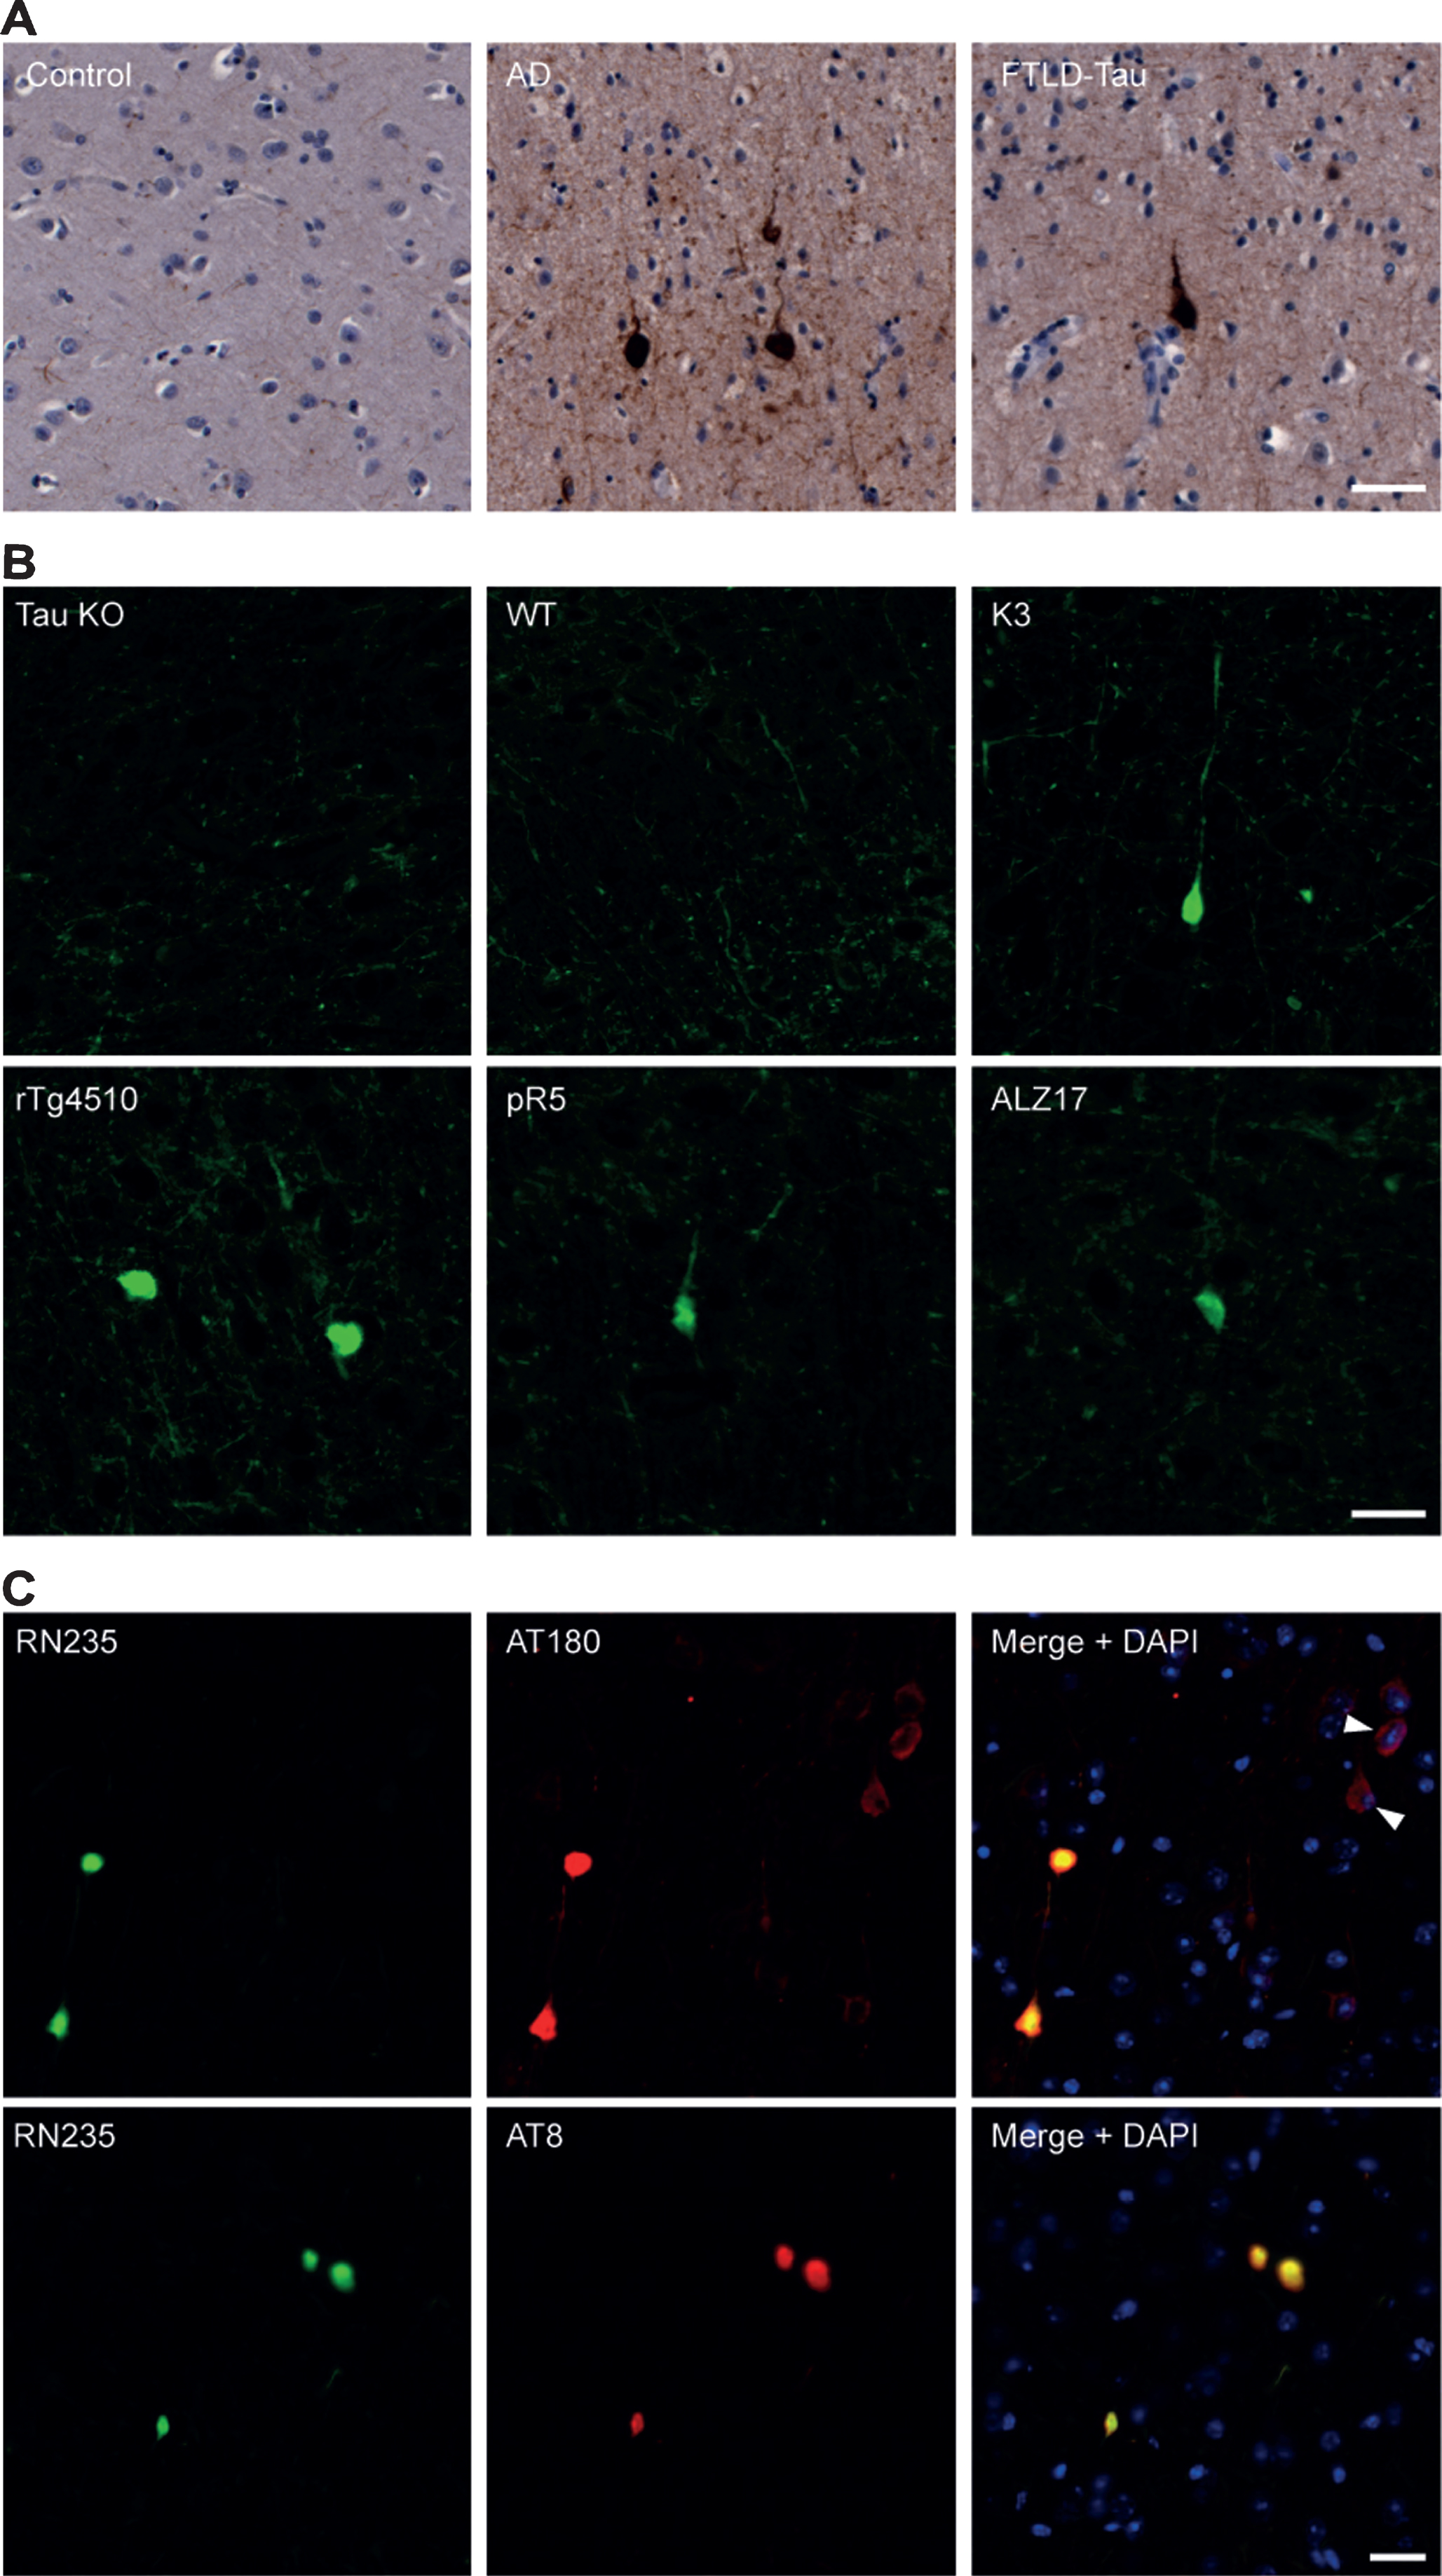 RN235 detects tau NFTs in human and mouse tissue. A) RN235 detects NFTs which lack a definable nucleus in human cortical tissue from patients with Alzheimer’s disease (AD; n = 2; mean age = 84.5 years) and frontotemporal lobar degeneration-tau (FTLD-tau; n = 2; mean age = 88.5 years) but not in control tissue (control; n = 2; mean age = 73 years). B) Similar aggregates are also detected in the cortical tissue of rTg4510 (4 months), ALZ17 (12 months), and pR5 (6 months) tau transgenic mice but not in tau knockout mice (tau KO; 6 months) or wild-type (WT) animals (n = 3). C) Comparison of RN235 (green) labeling to that of the p-Thr231 antibody, AT180, and the p-Ser202/205 antibody, AT8 (both red), in cortical tissue of a 3-month-old K3 mouse, revealing that RN235 labeling is consistent with that of AT8 and detects NFTs without a definable nucleus, whereas AT180 labeling is frequently more diffuse (arrowhead) and the nucleus is clearly observed, consistent with pre-NFTs. Nuclear staining is shown with DAPI (blue). Scale bars = 25μm.